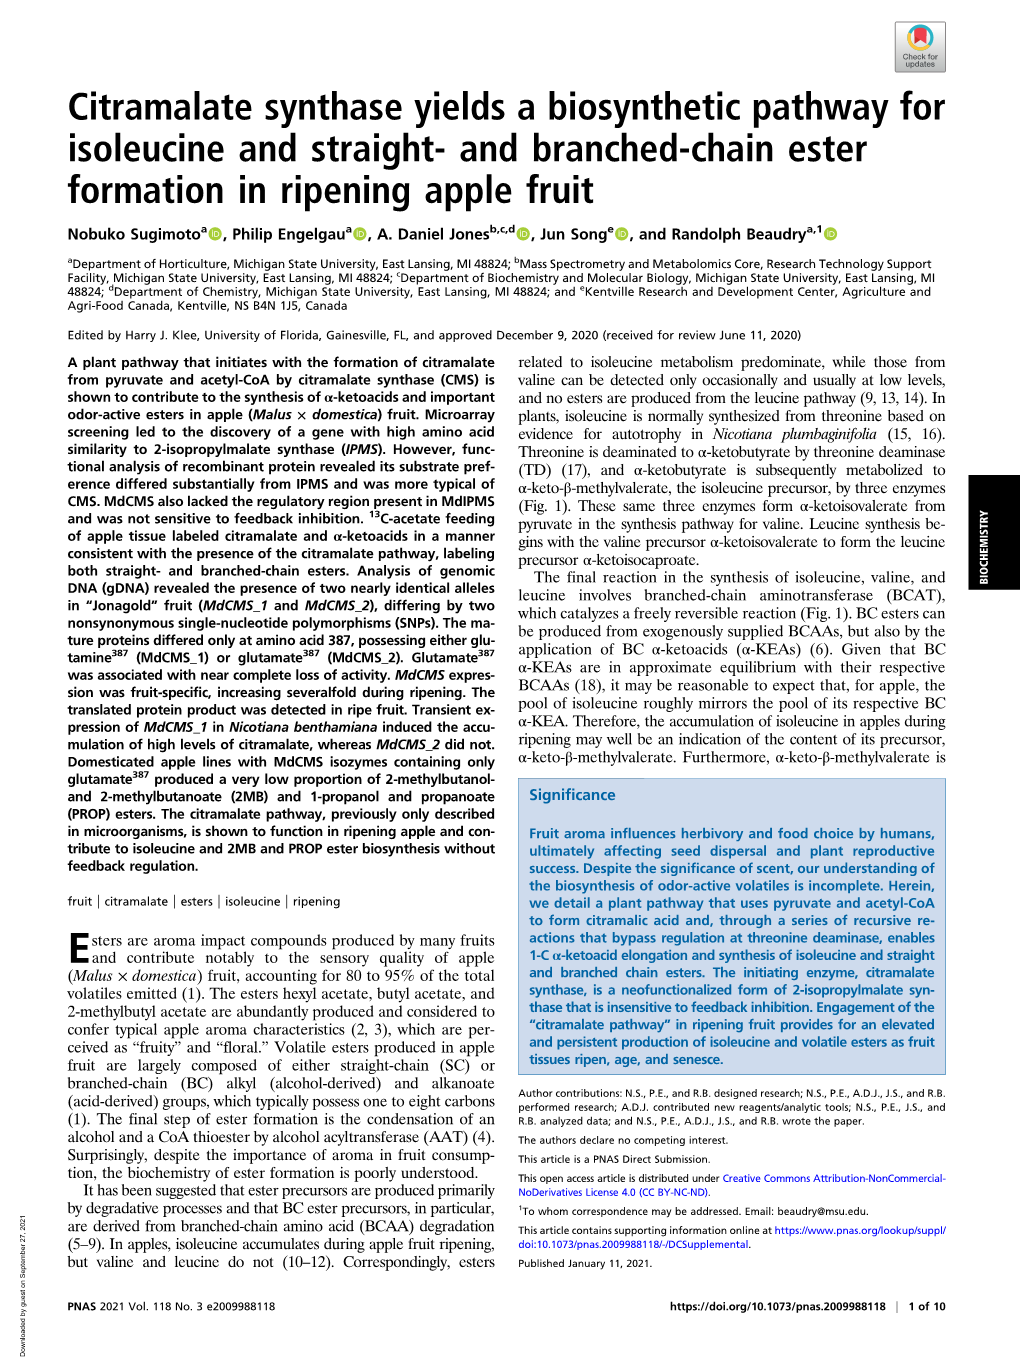 Citramalate Synthase Yields a Biosynthetic Pathway for Isoleucine and Straight- and Branched-Chain Ester Formation in Ripening Apple Fruit